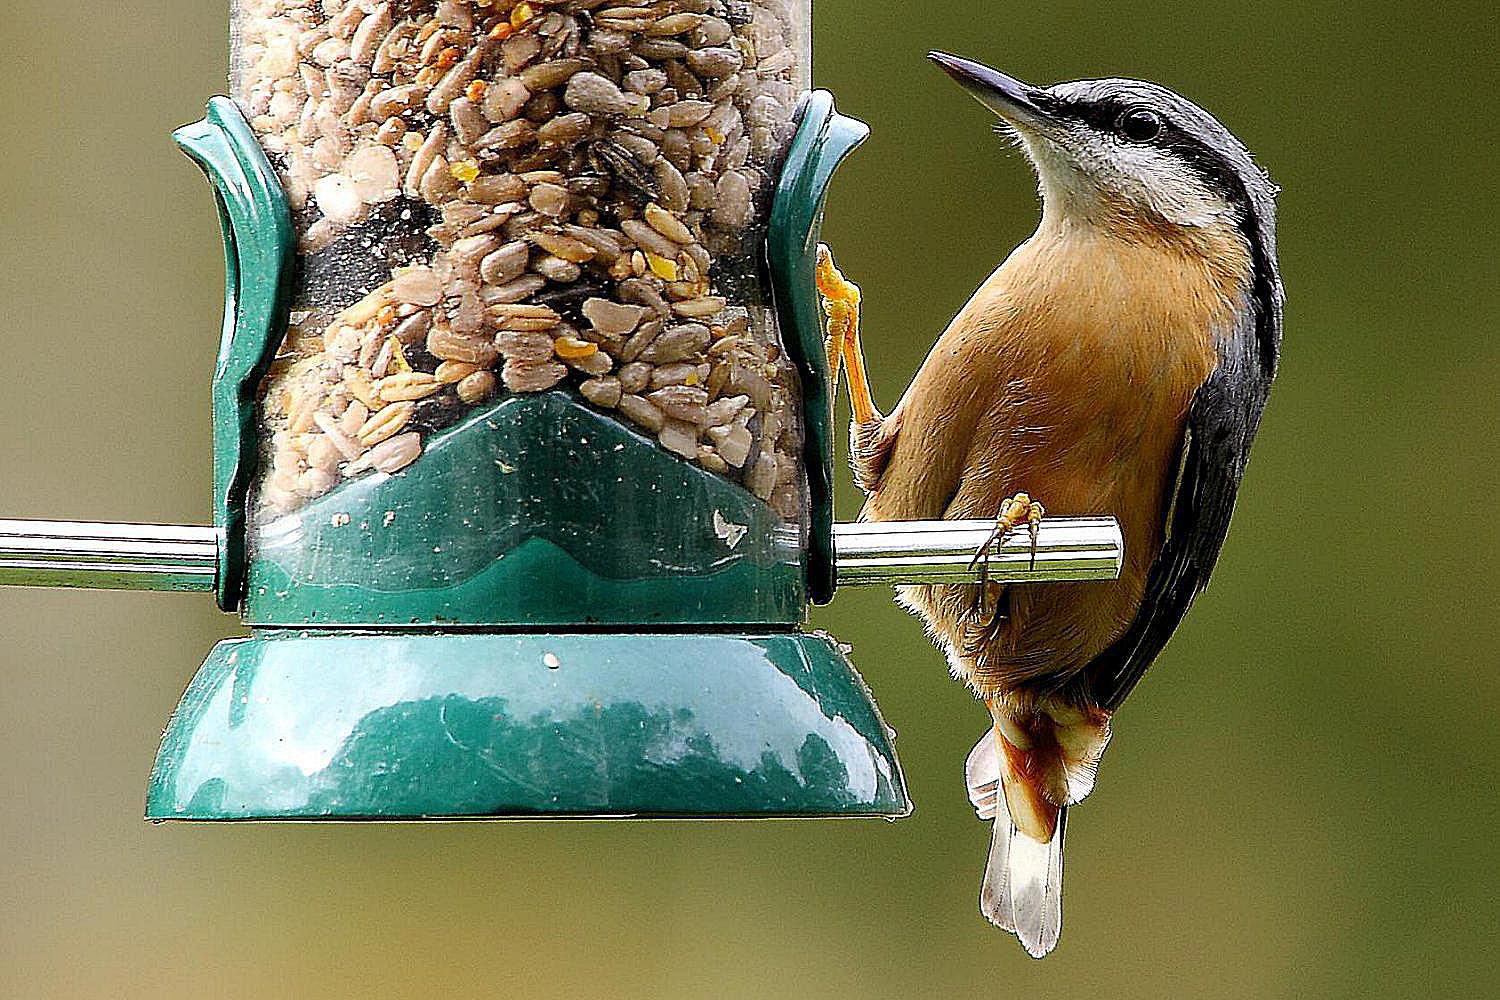 Strategies to save money on buying a bird seed